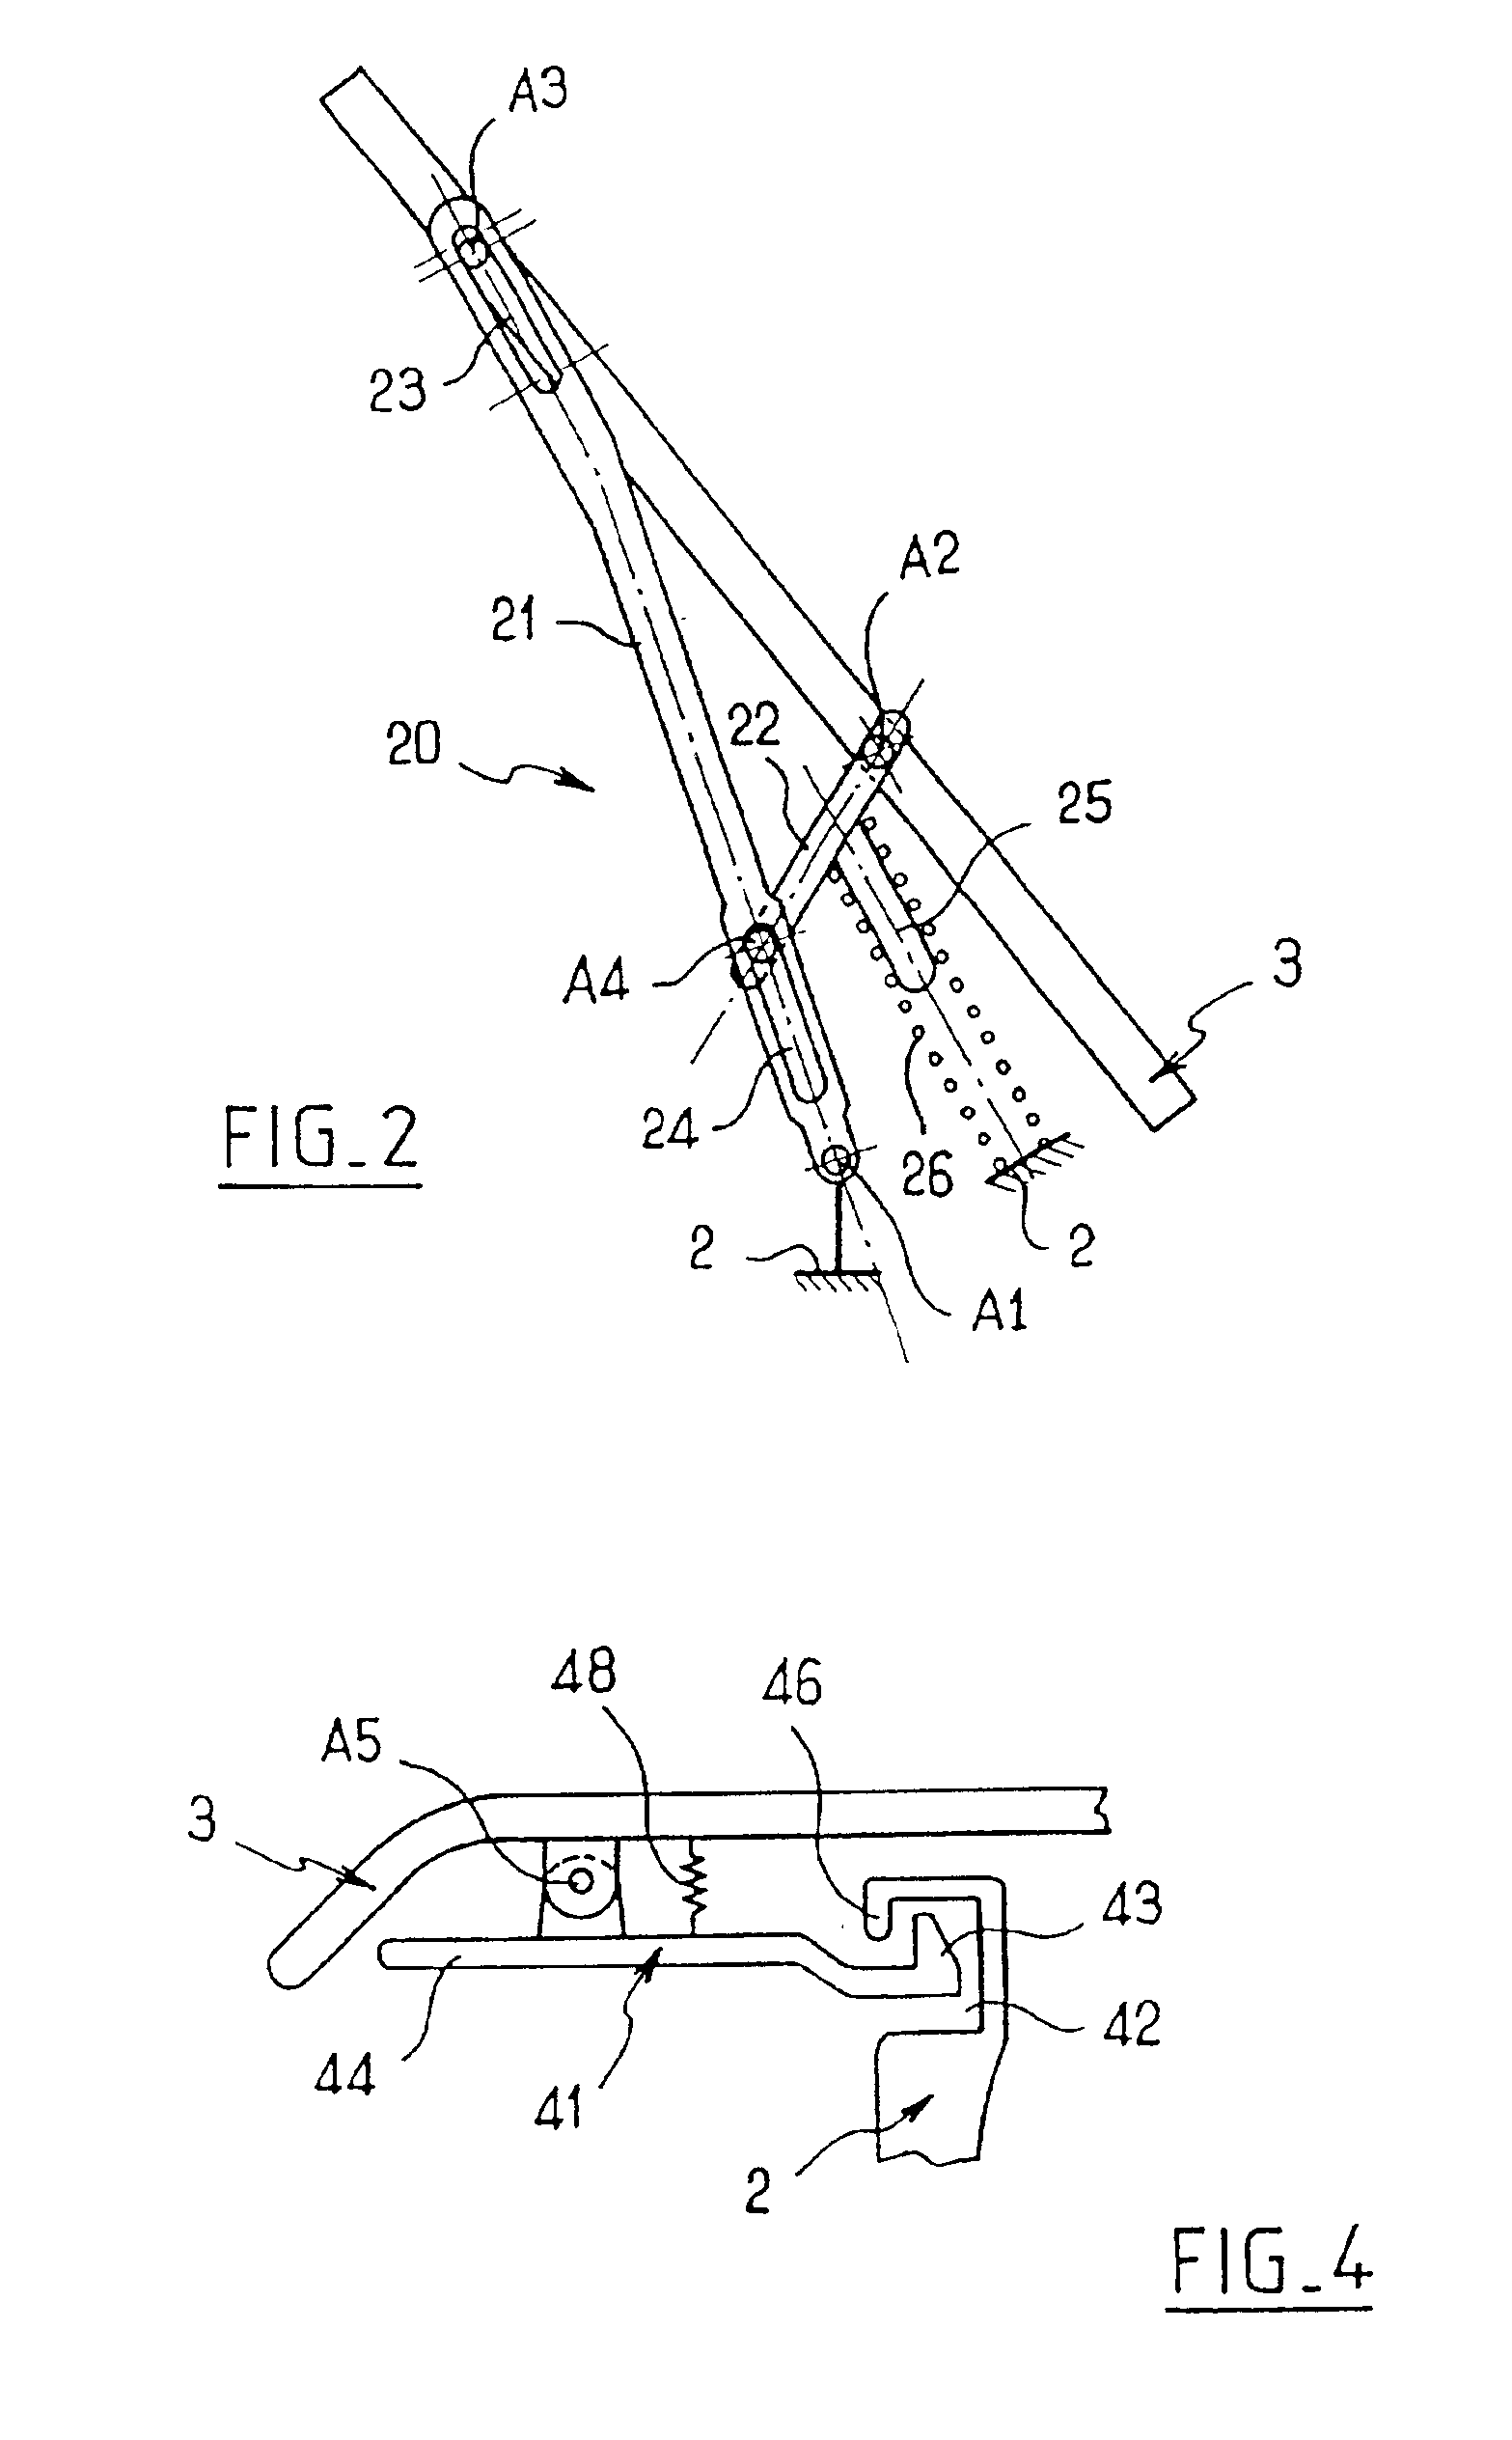 Automobile vehicle including associated body parts with reduced clearance